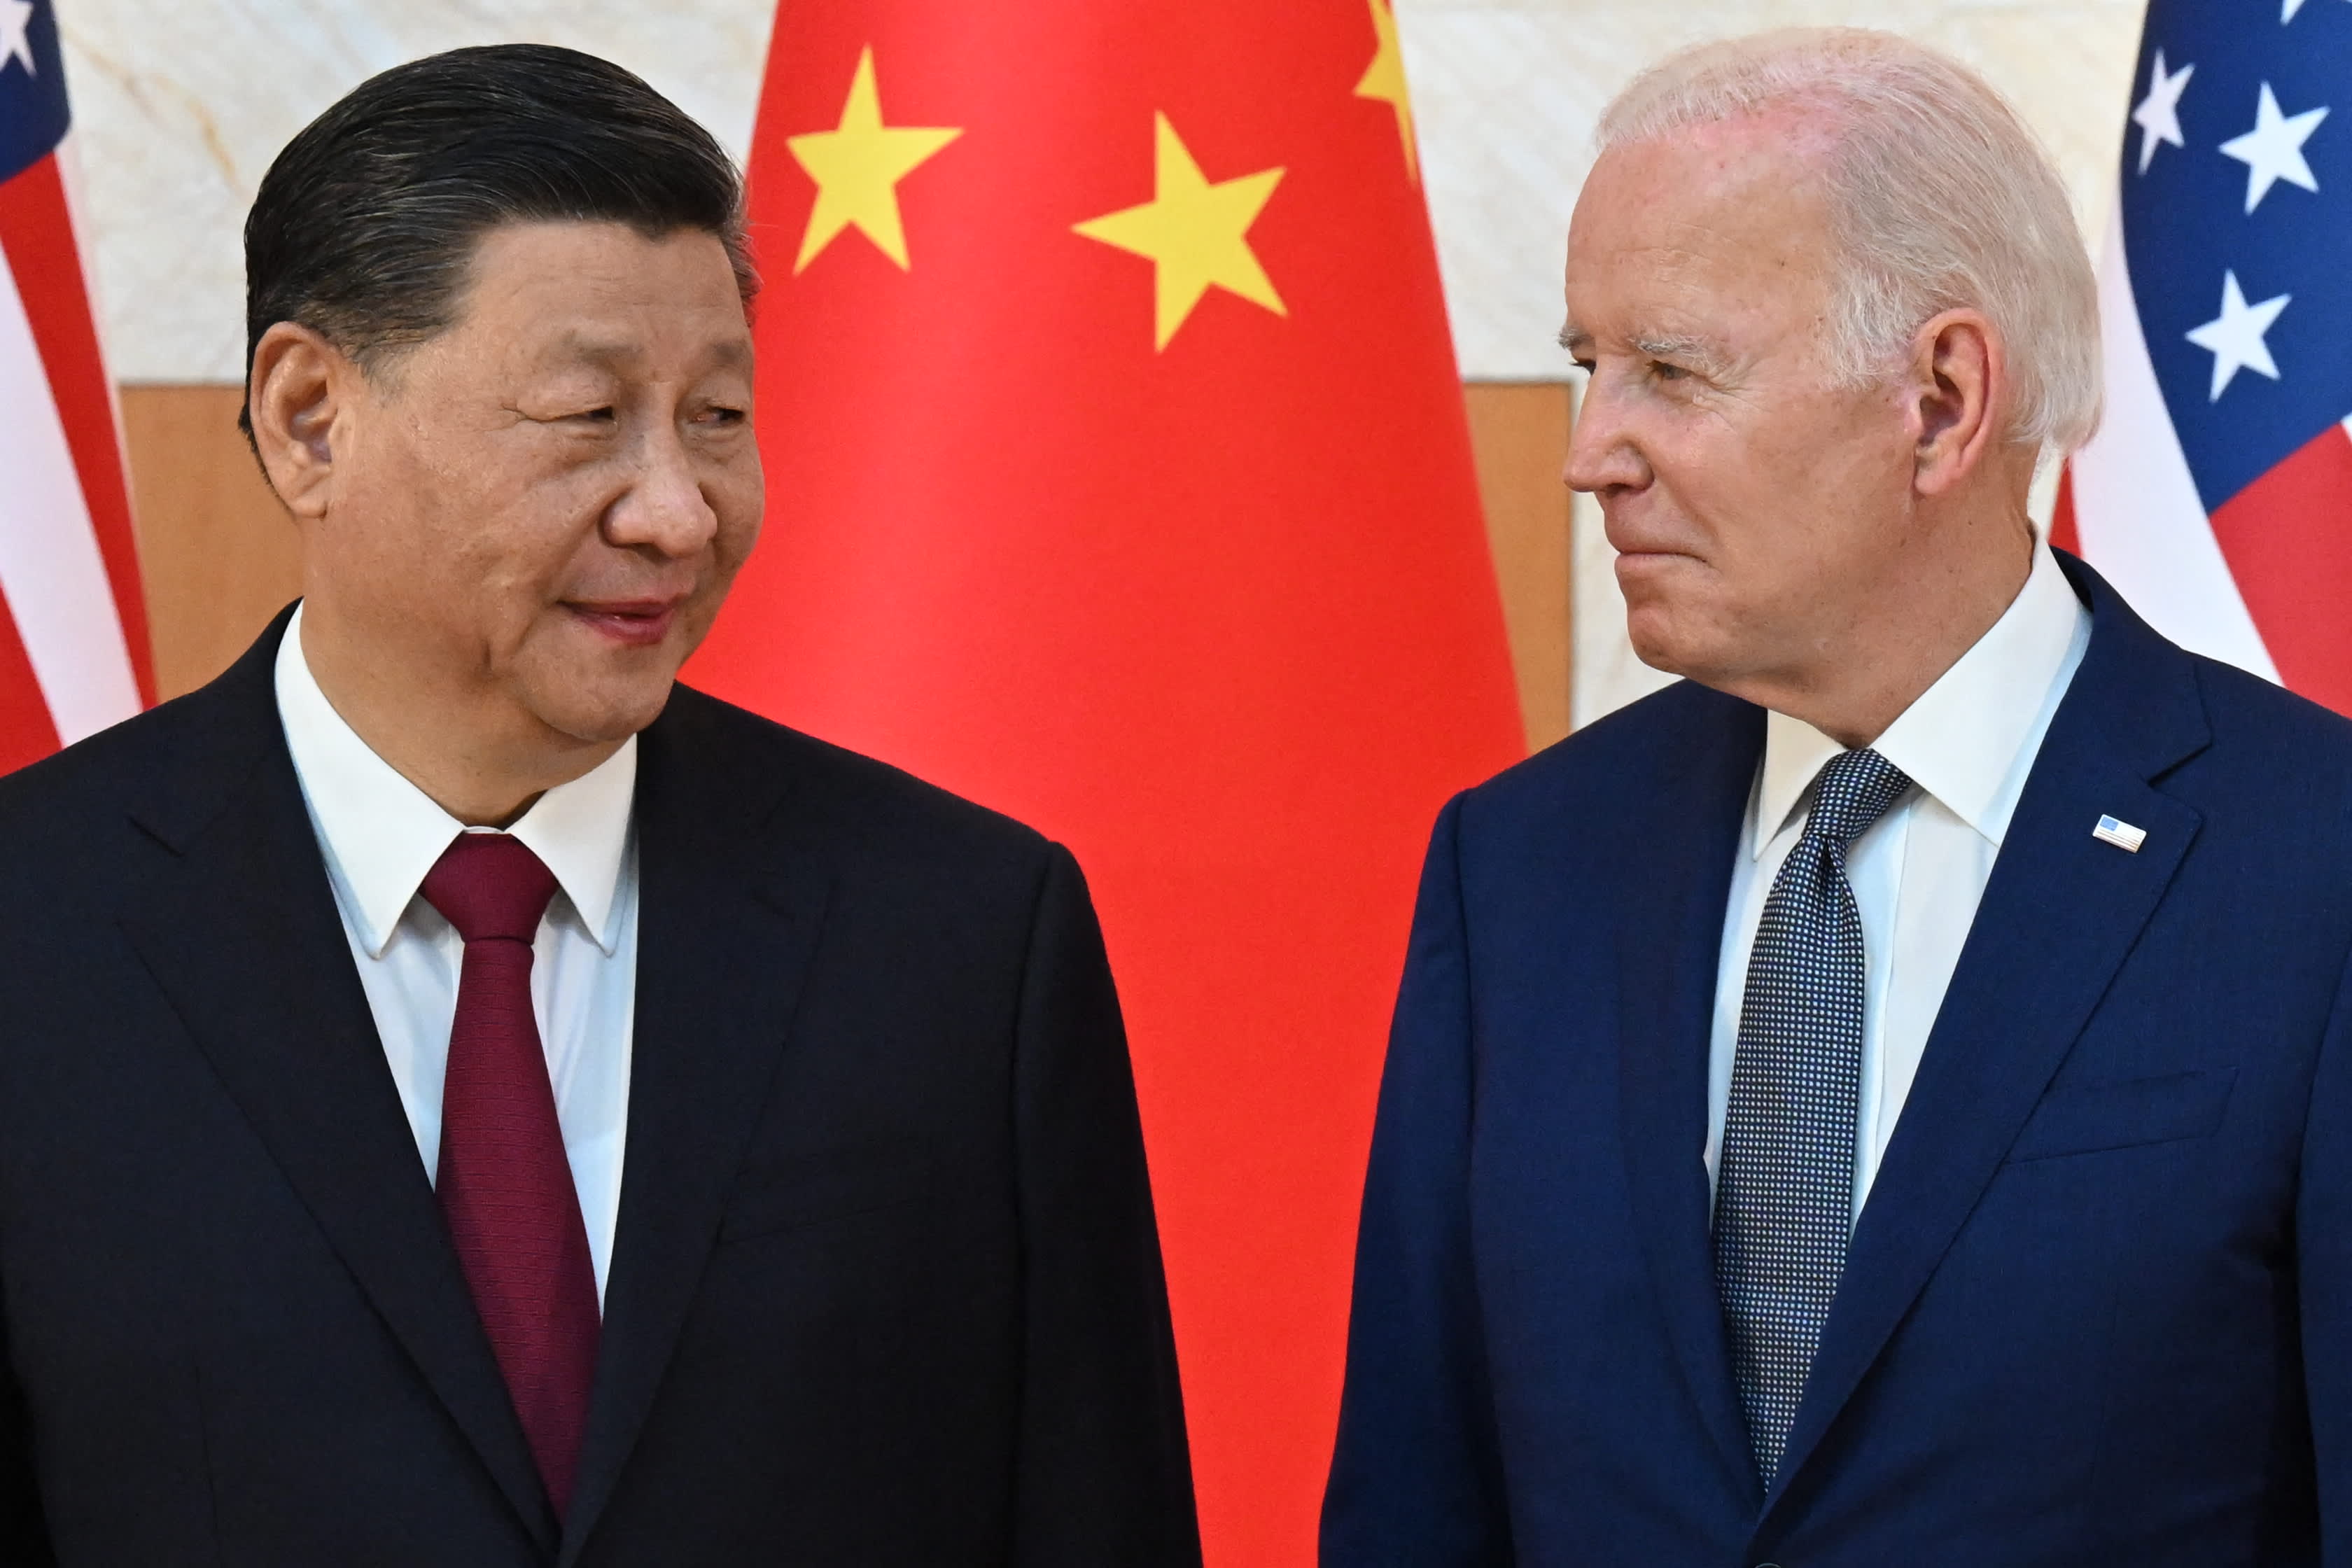 US-China Relations Are On a Dangerous Path Without Trust on Both Sides: Roach, Cohen